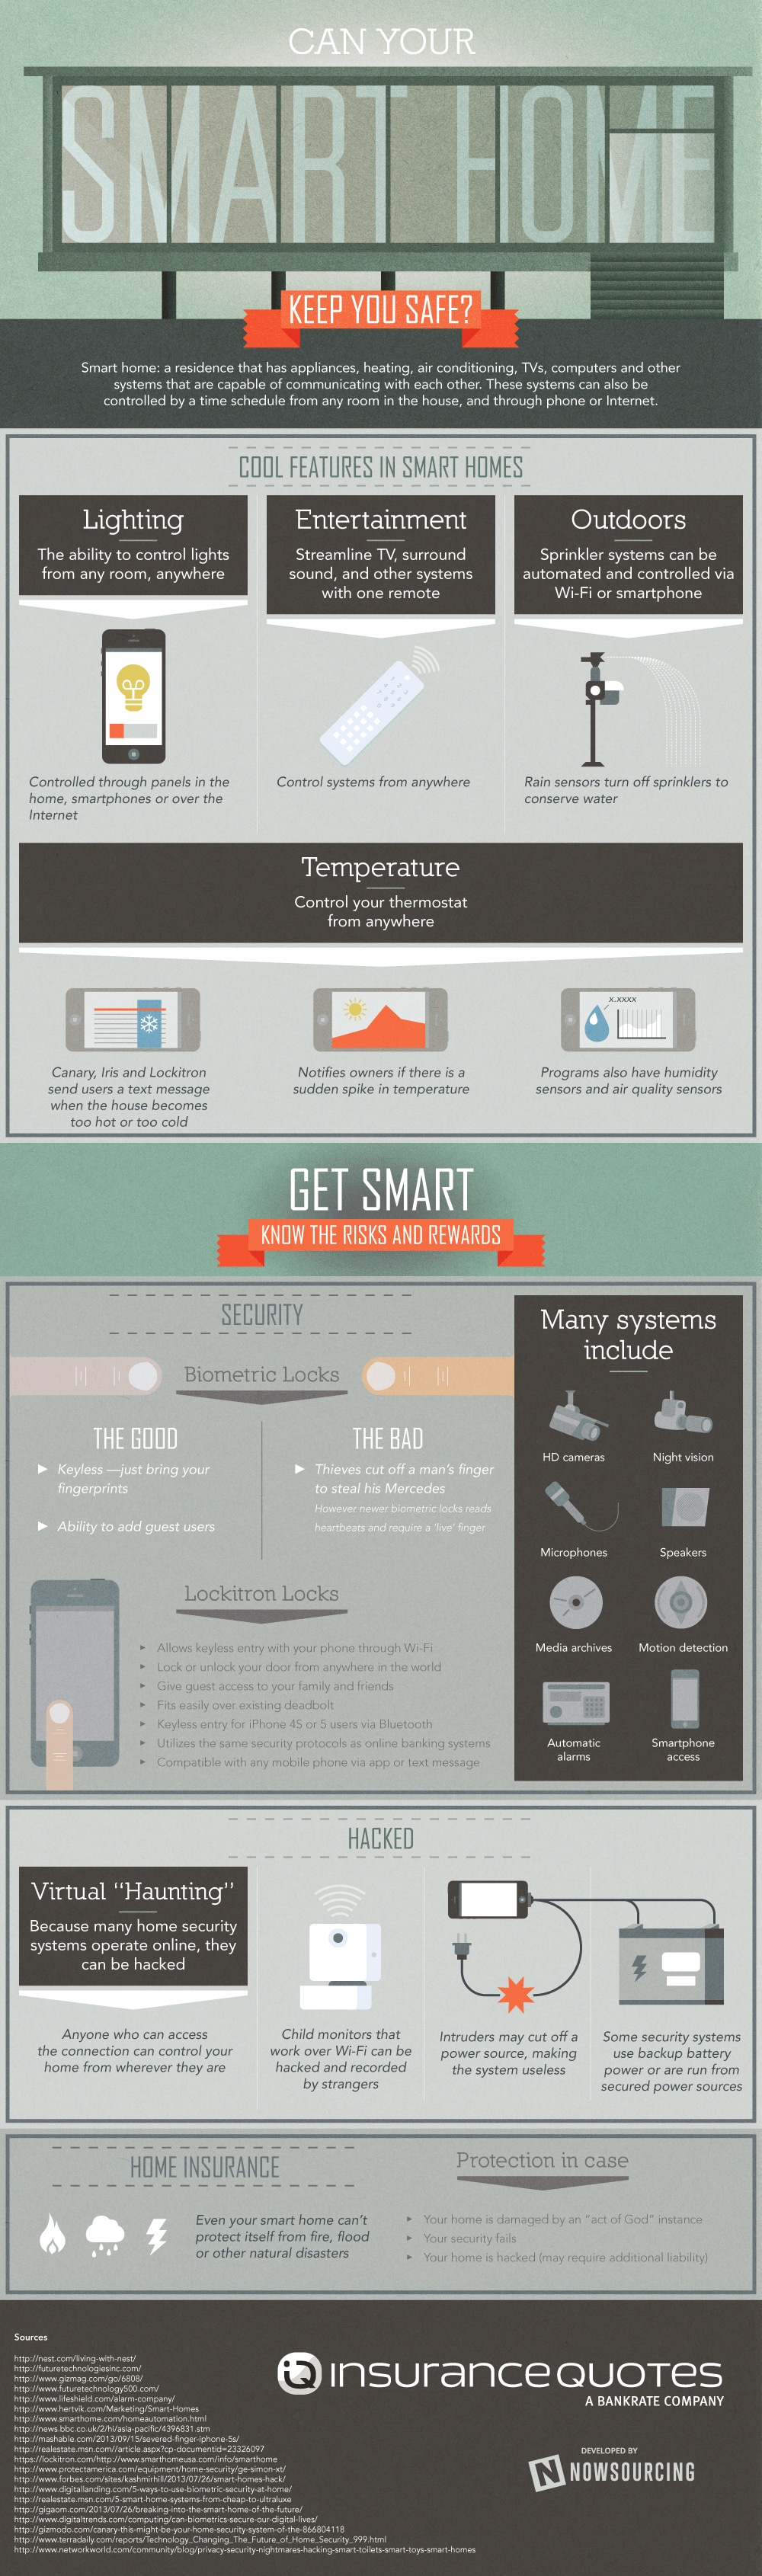 Smart Homes: Better Lifestyle Or Invitation For Hackers? [Infographic]